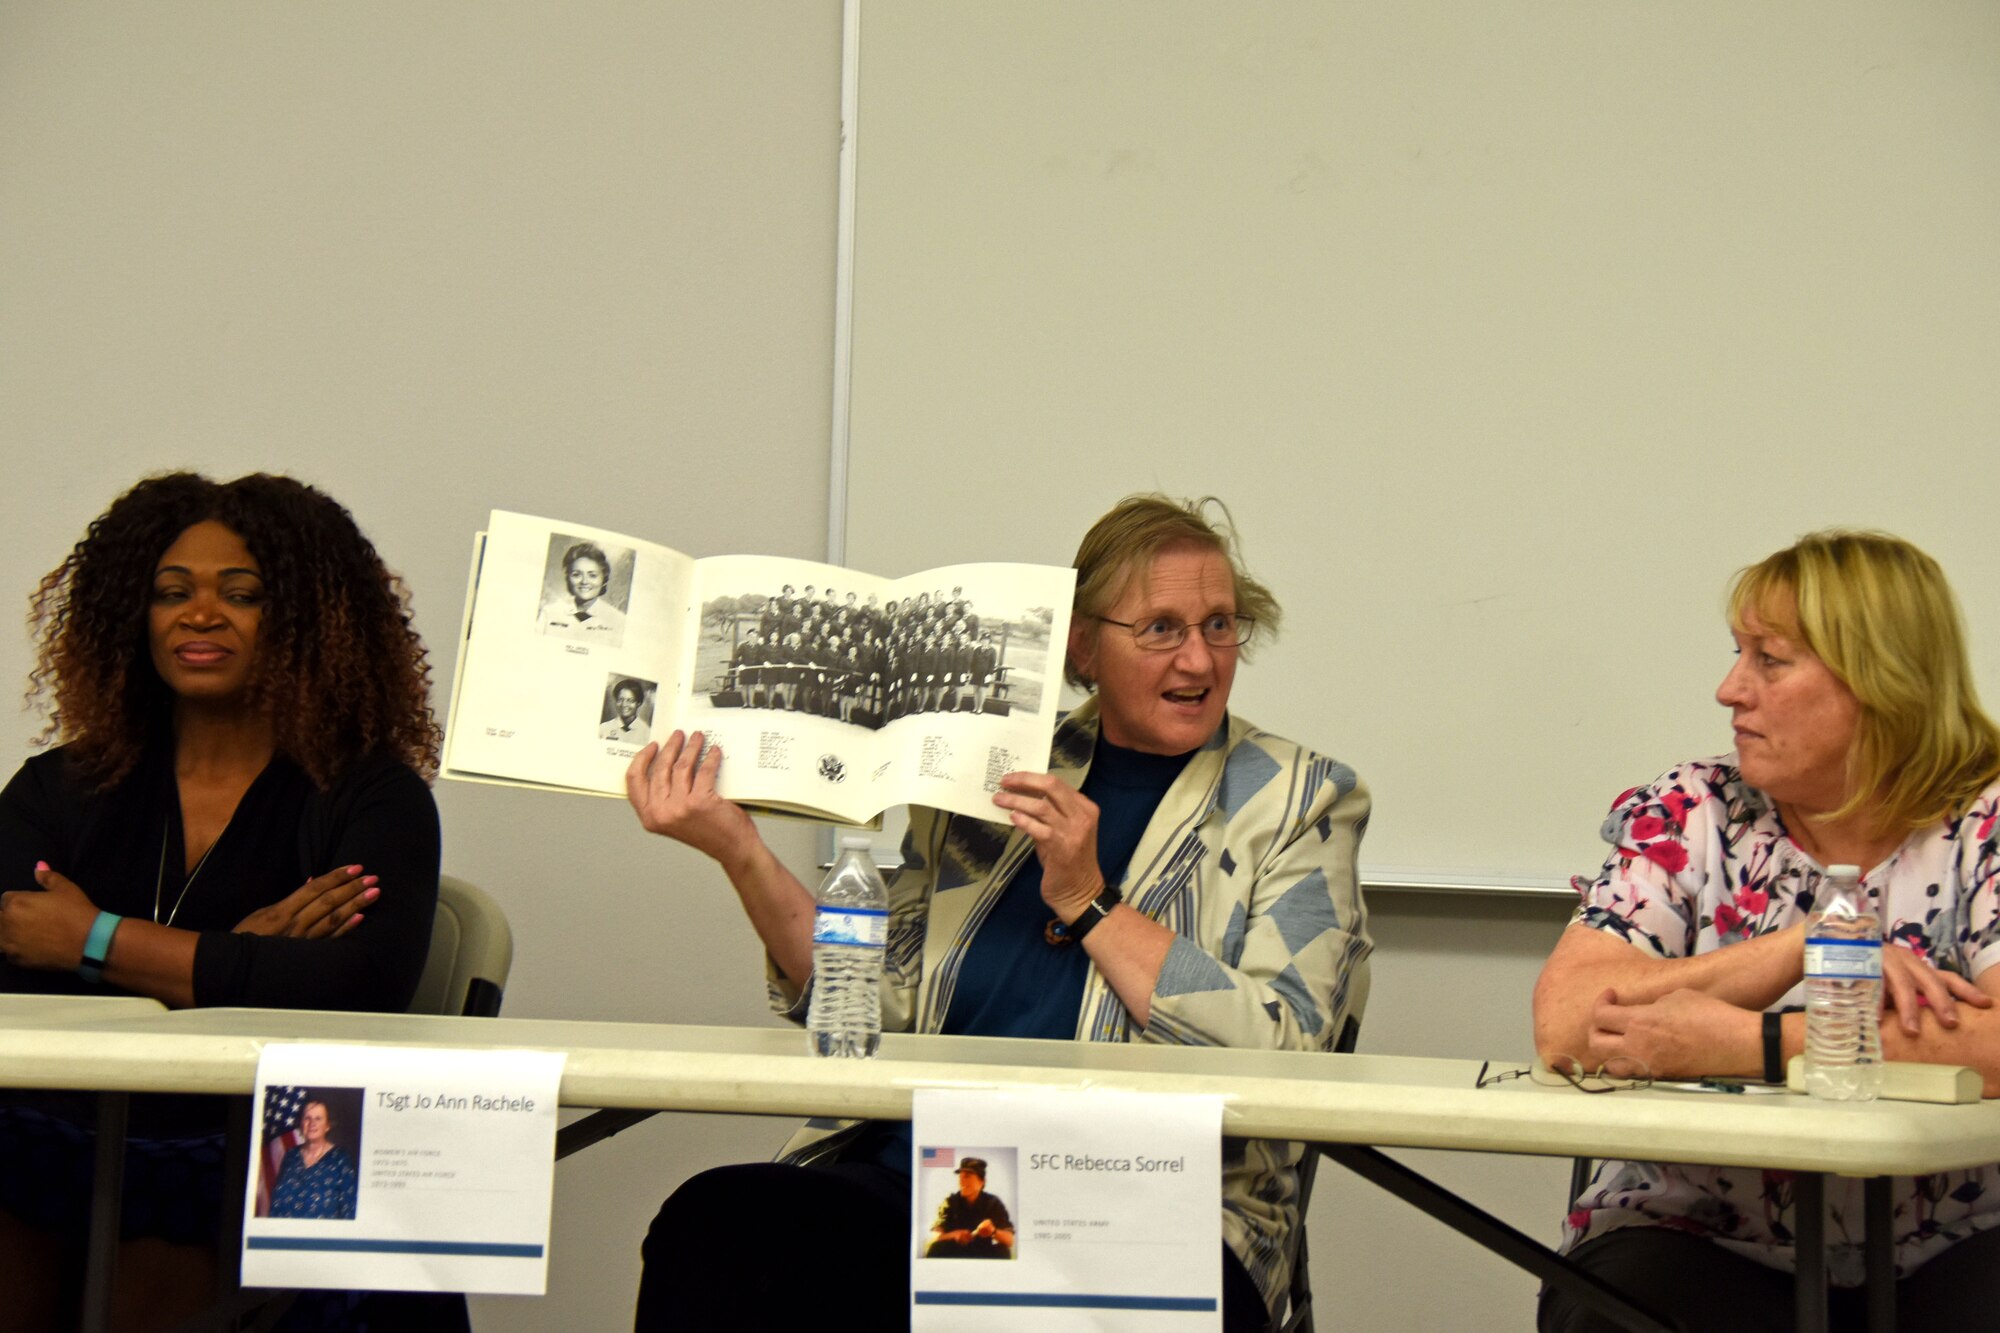 Jo Ann Rachele, retired member of Women in the Air Force, shows a picture of her graduating flight from basic military training in 1973 at the Service Through the Decades panel in honor of Women’s History Month at the Taylor Chapel on Goodfellow Air Force Base, Texas, March 8, 2019. Rachele continued to serve in the Air Force after WAF was decommissioned and the women were integrated into the Air Force. (U.S. Air Force photo by Senior Airman Seraiah Hines/Released)